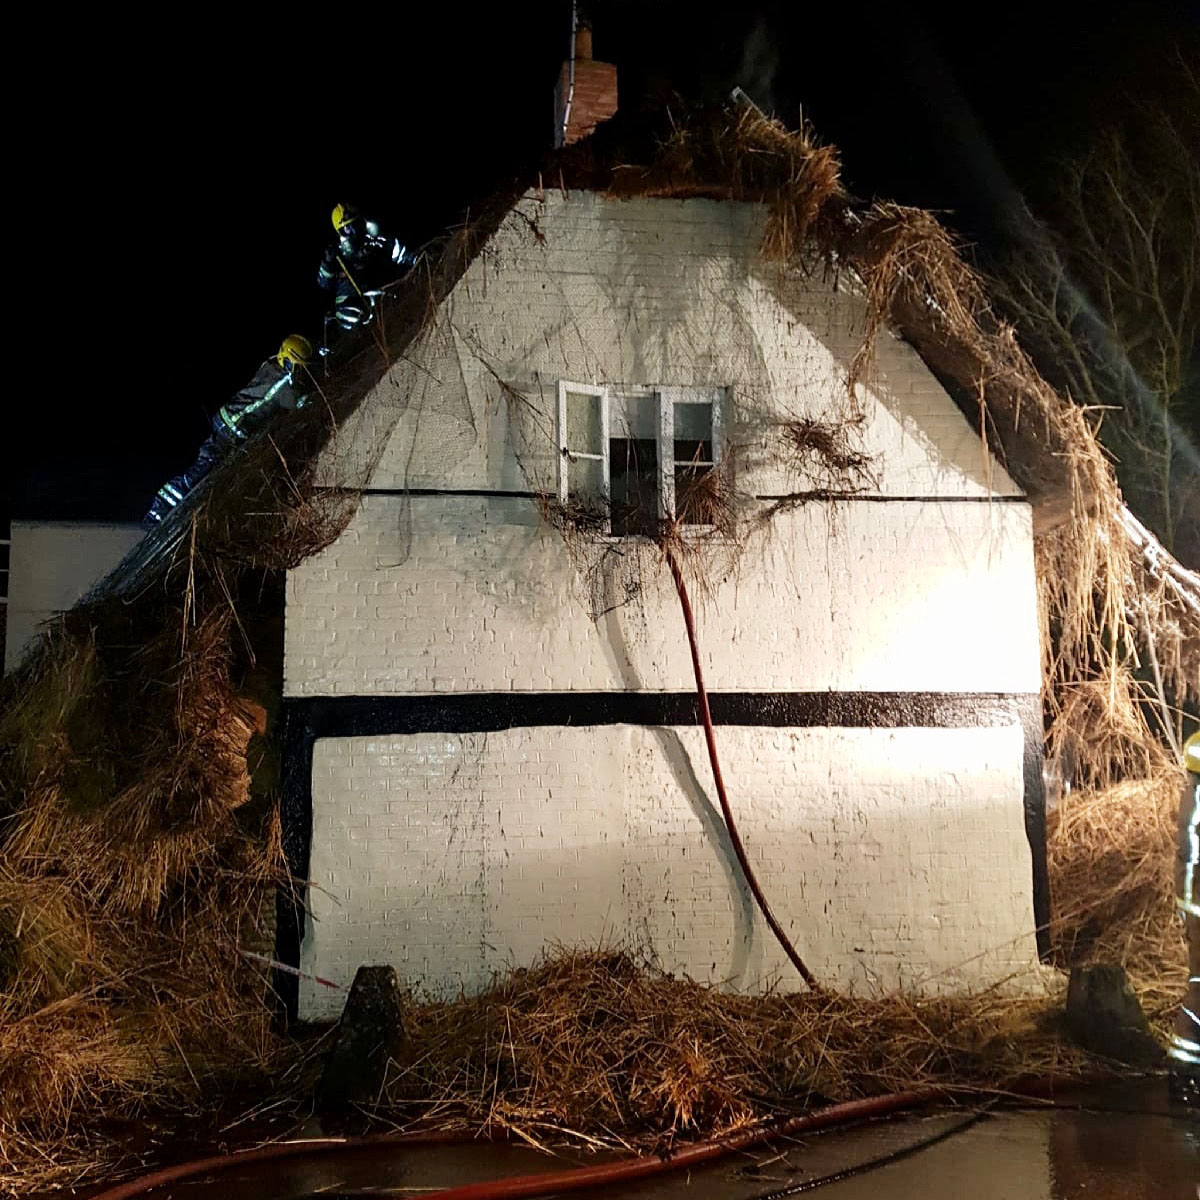 Firefighters tackle fire in thatched roof of Stert cottage